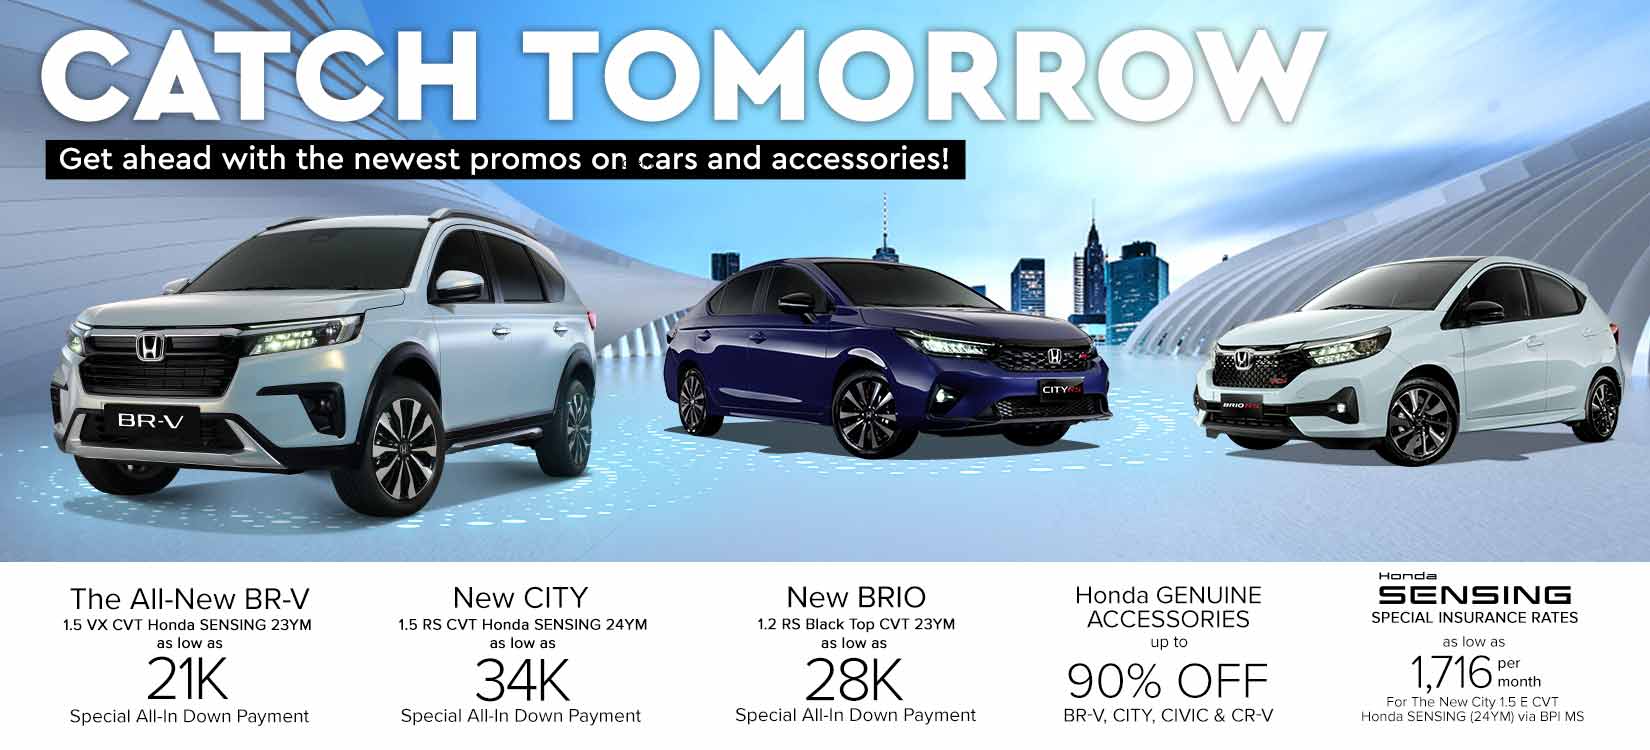 Exclusive Offers in “Catch Tomorrow” September Promo for New City, New Brio, and All-New BR-V